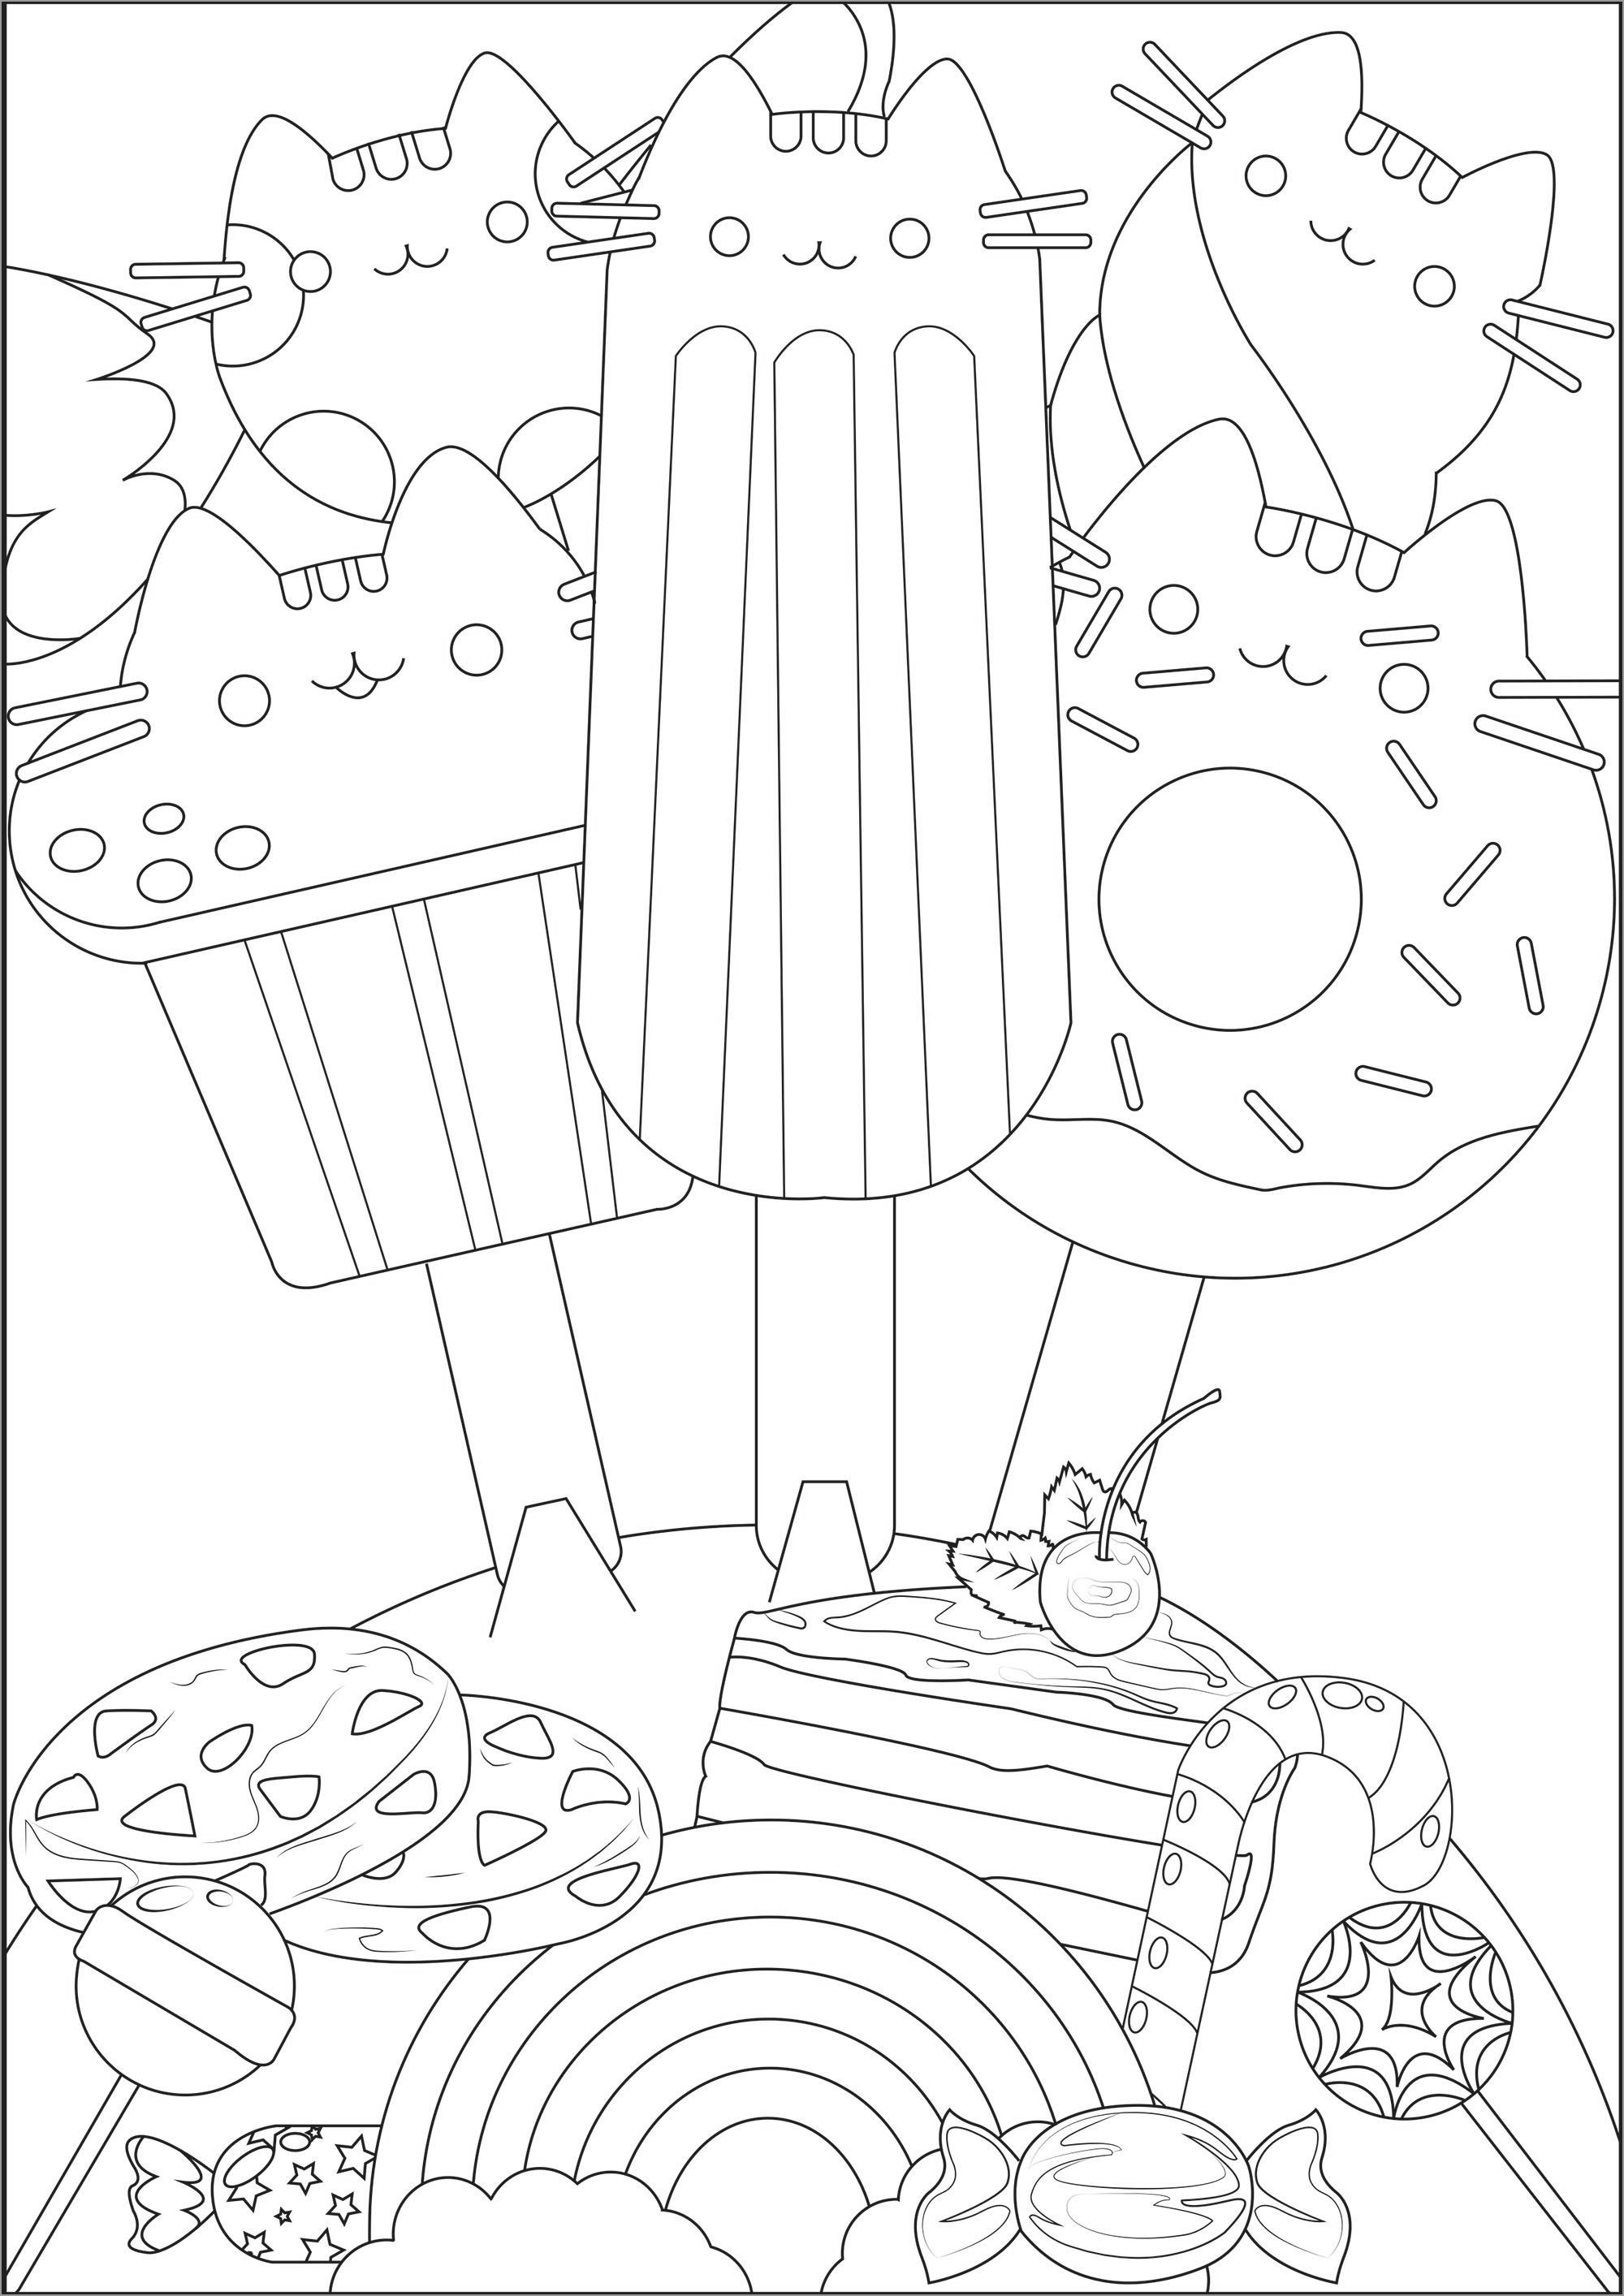 Pusheen Coloring Pages Ice Cream, Donut and Cake